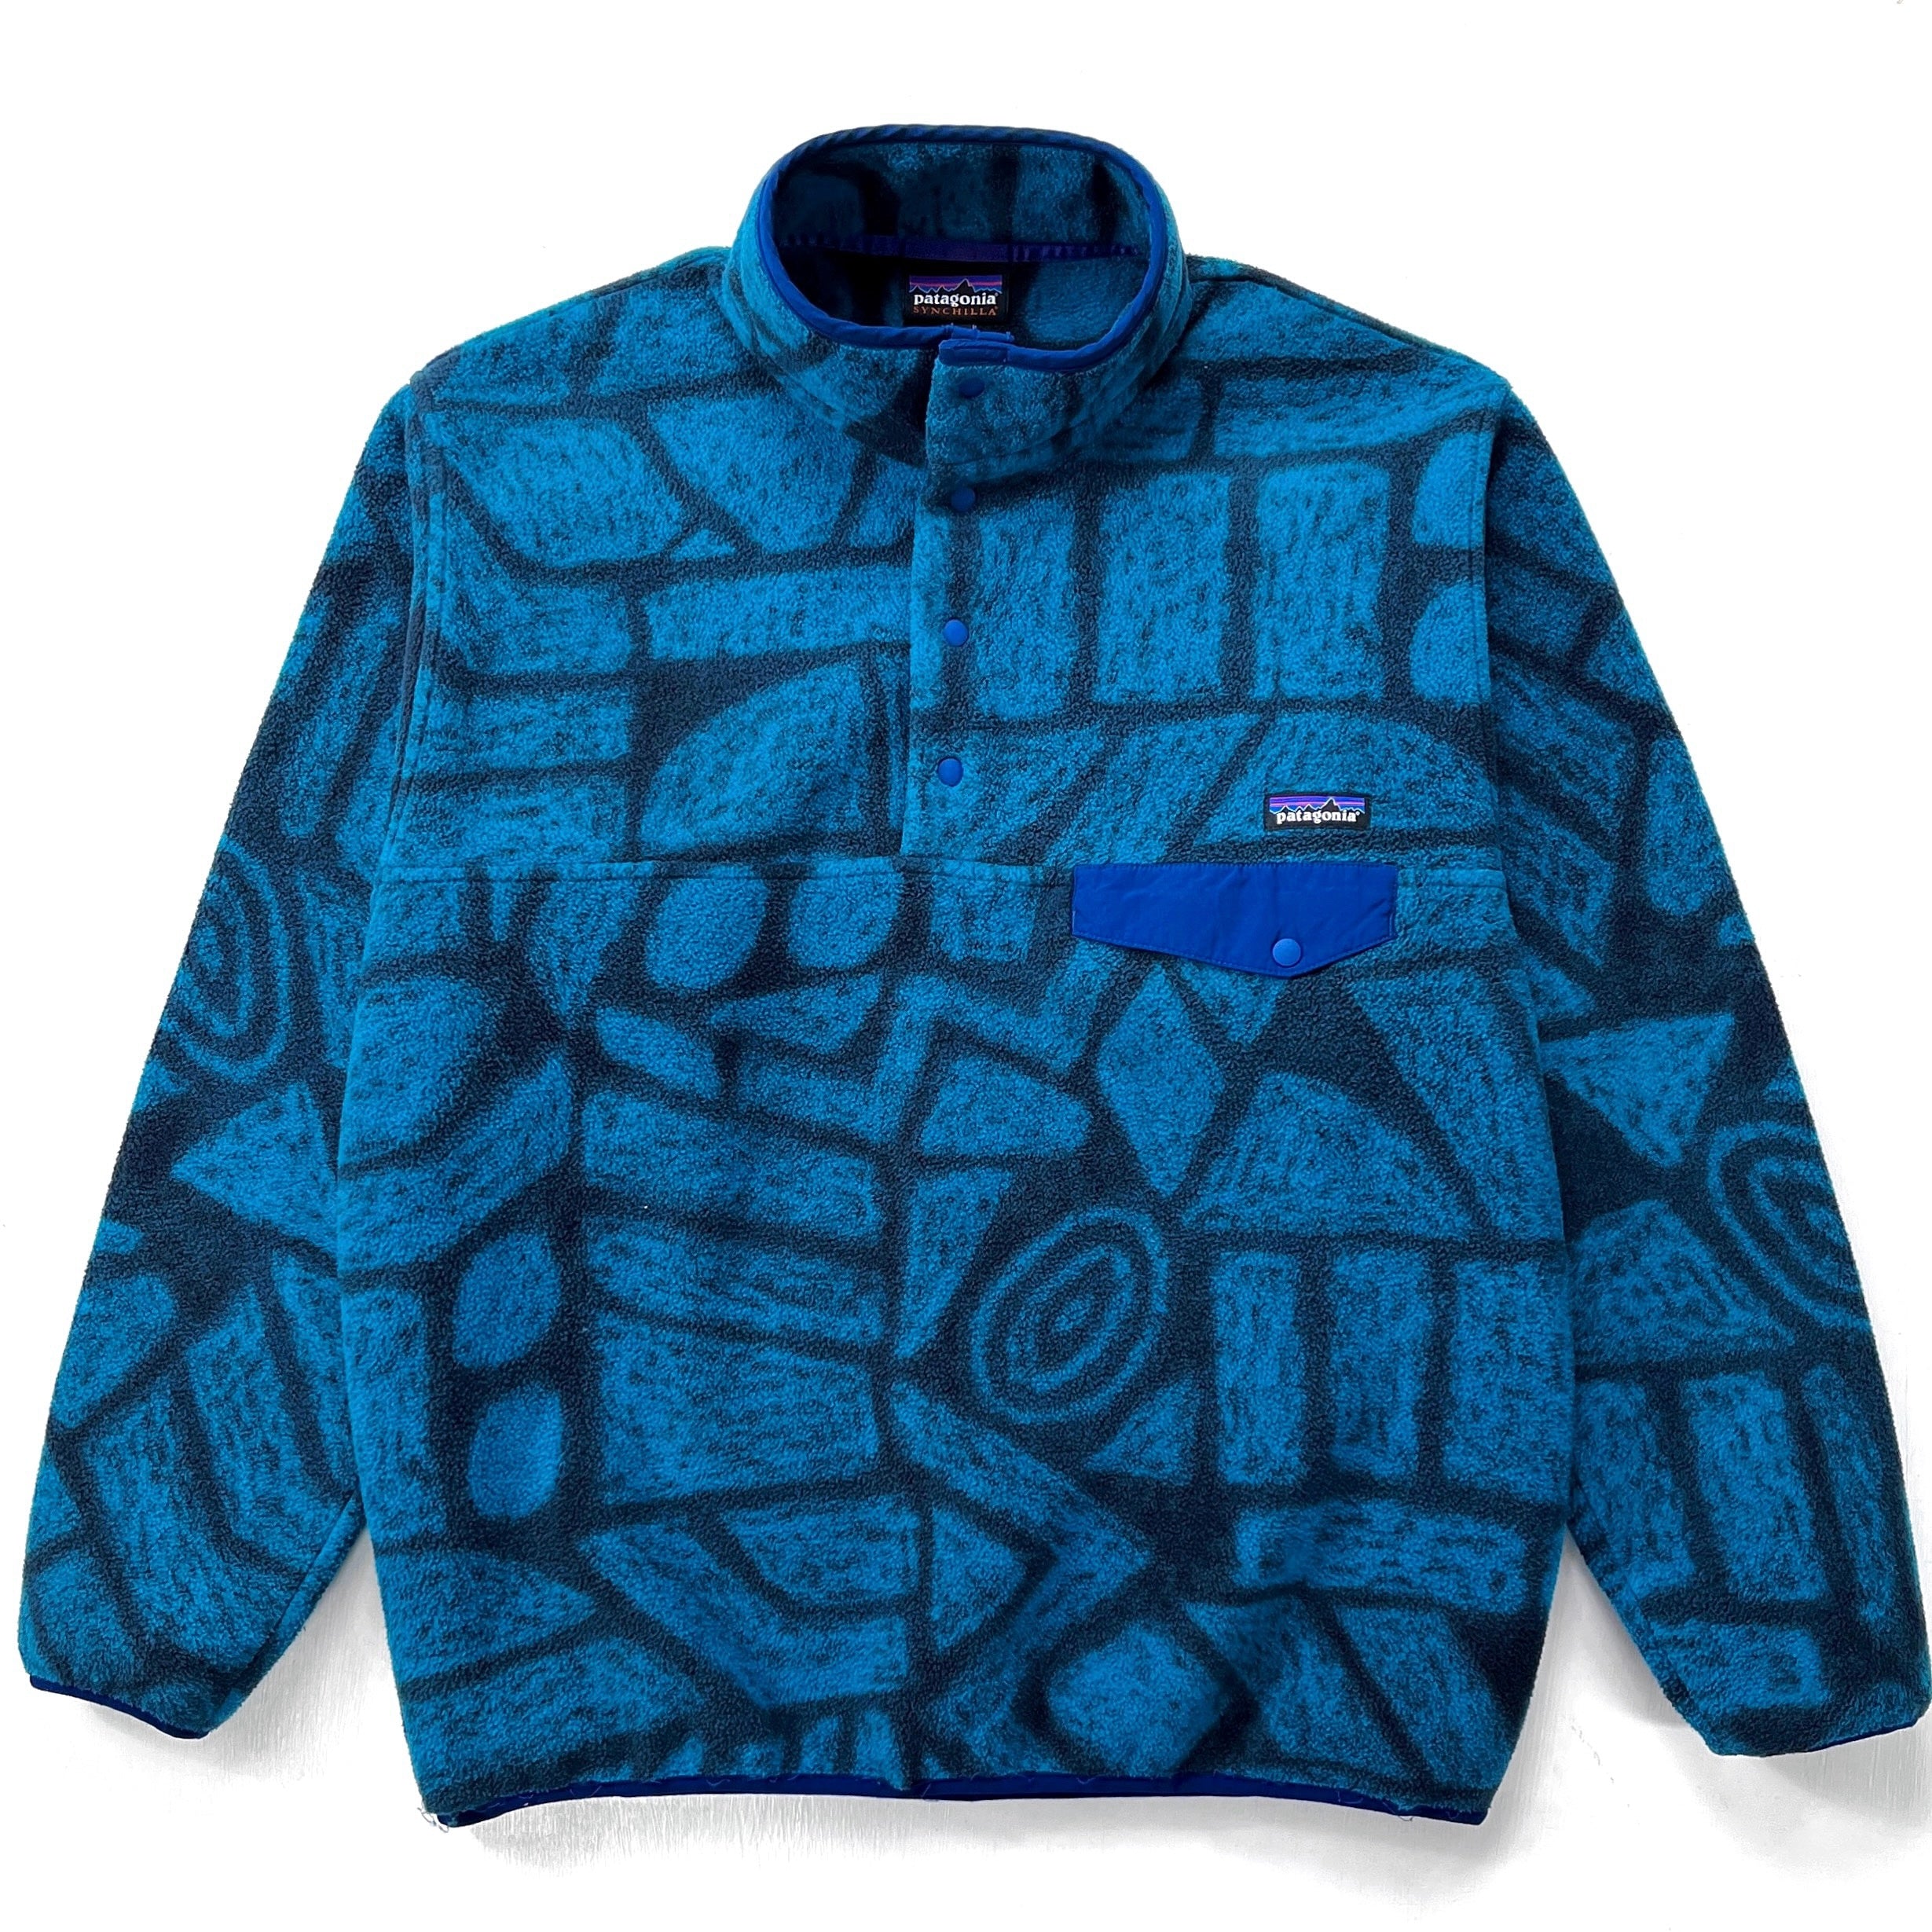 2015 Patagonia Printed Synchilla Snap-T, Shale: Navy Blue (L)